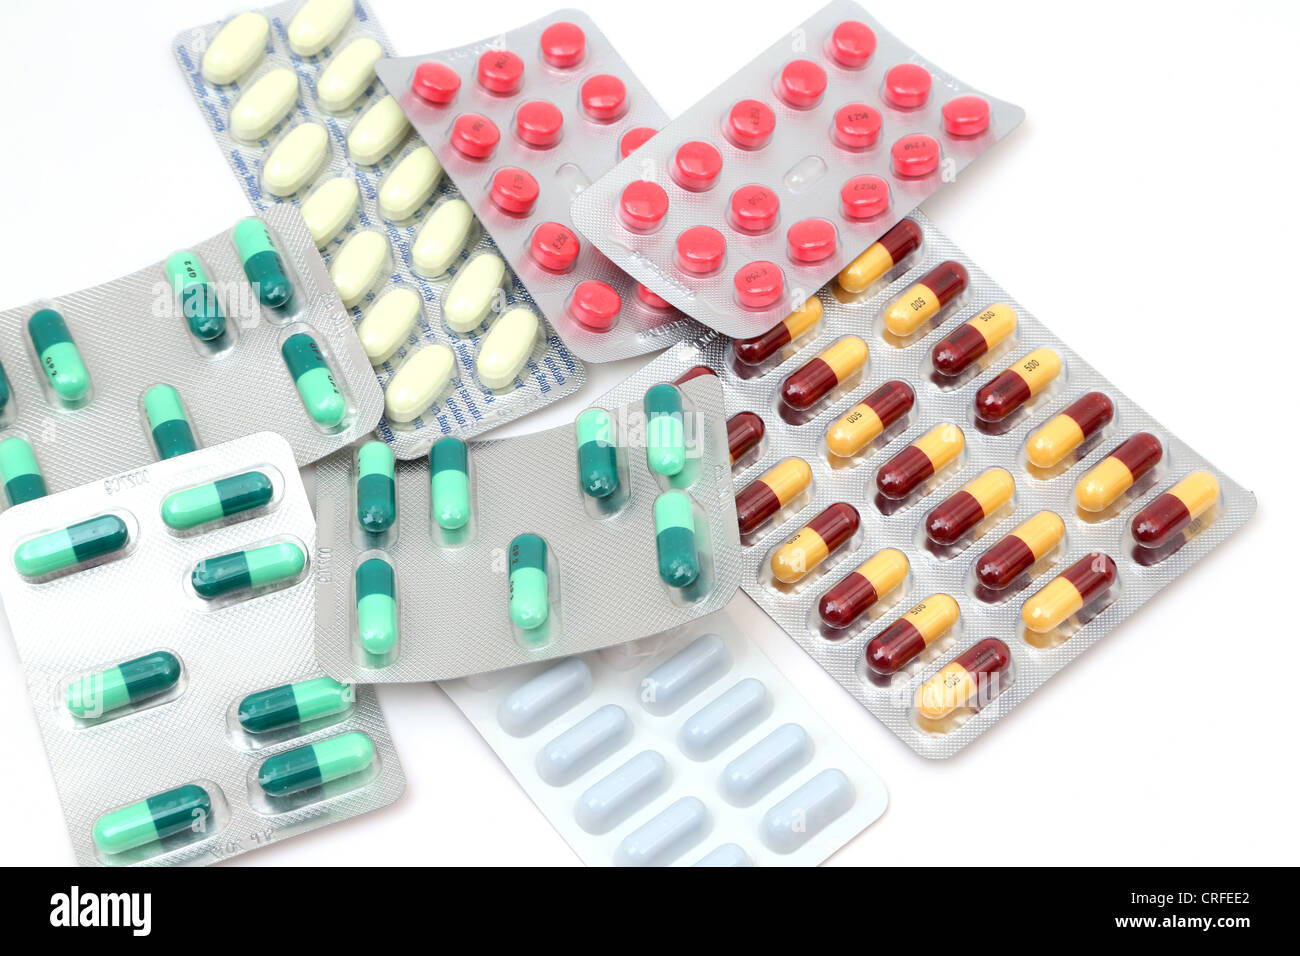 A Collection Of Antibiotics In Blister Packs Stock Photo